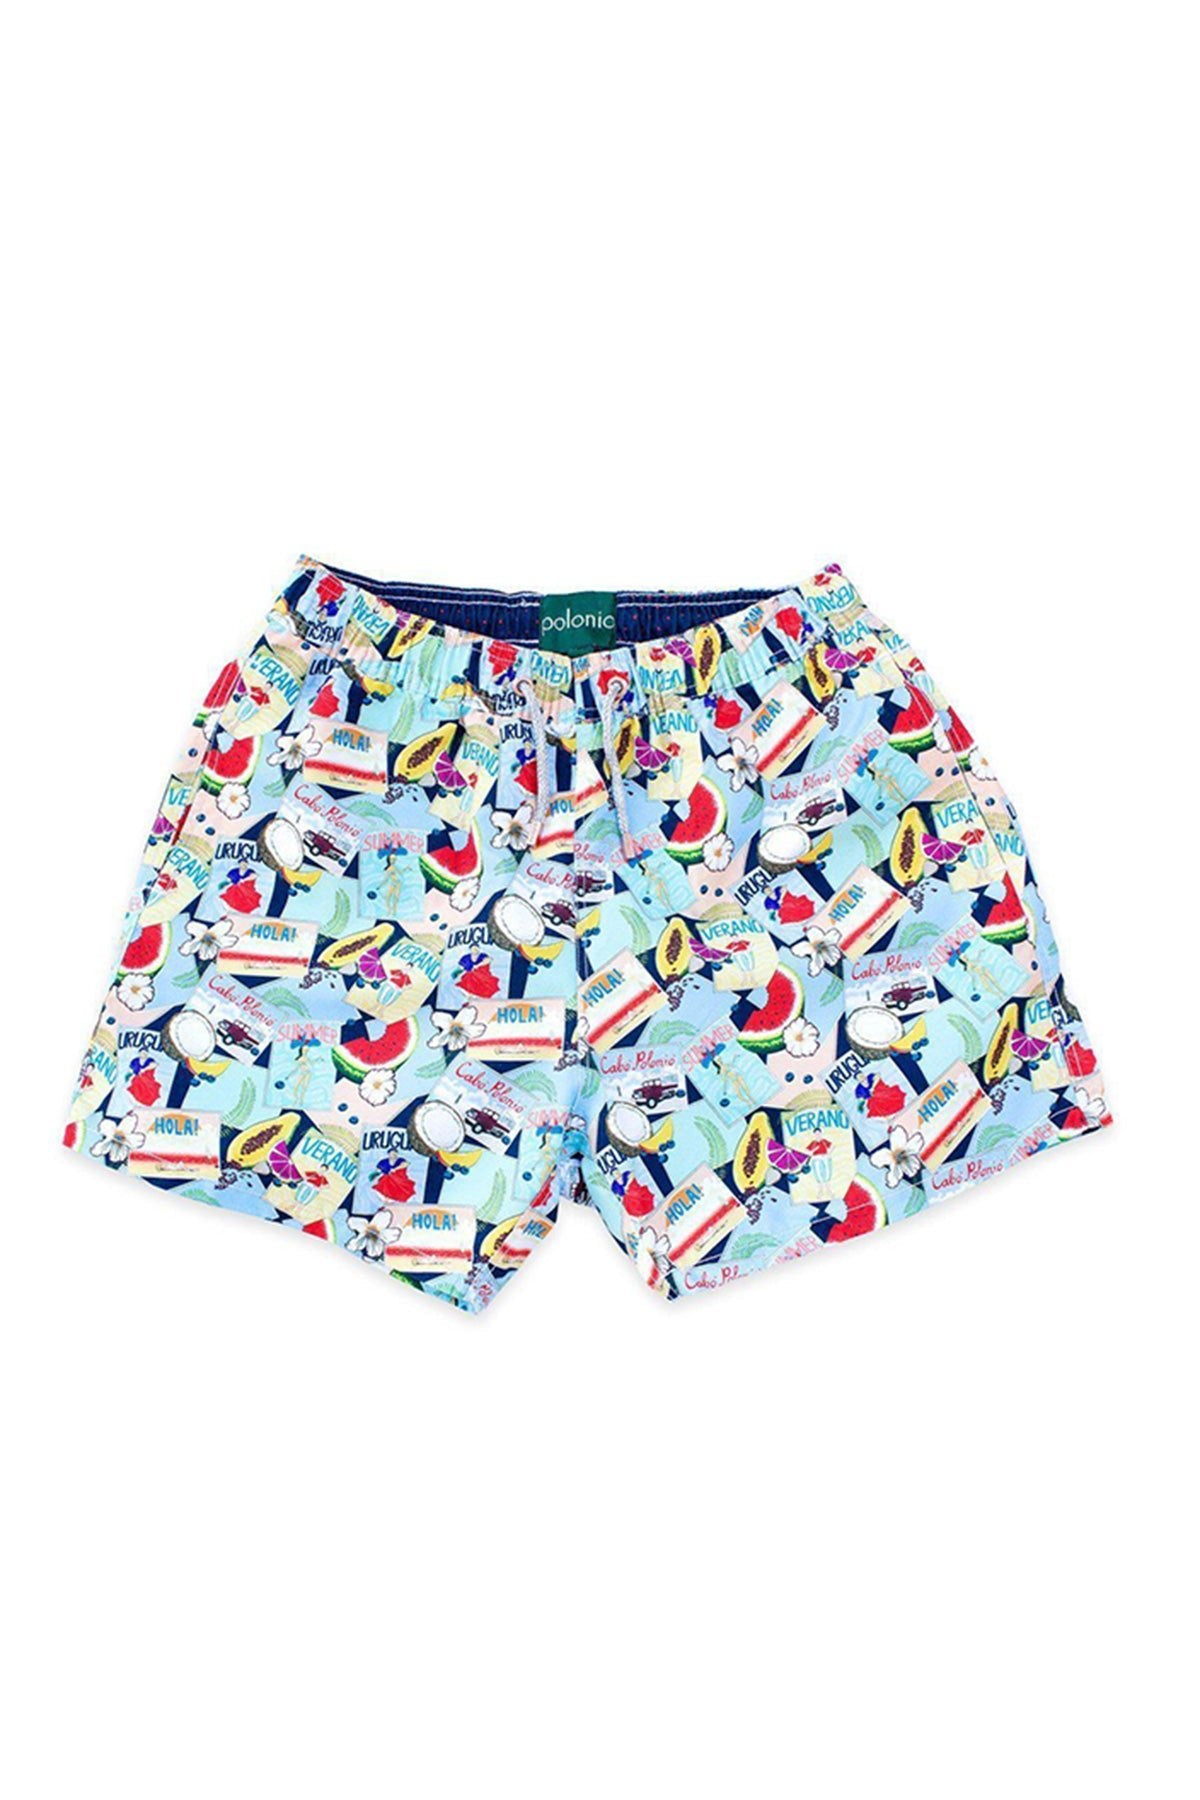 Men's Swim Trunks in Blue with Floral and Fruit Print | Polonio